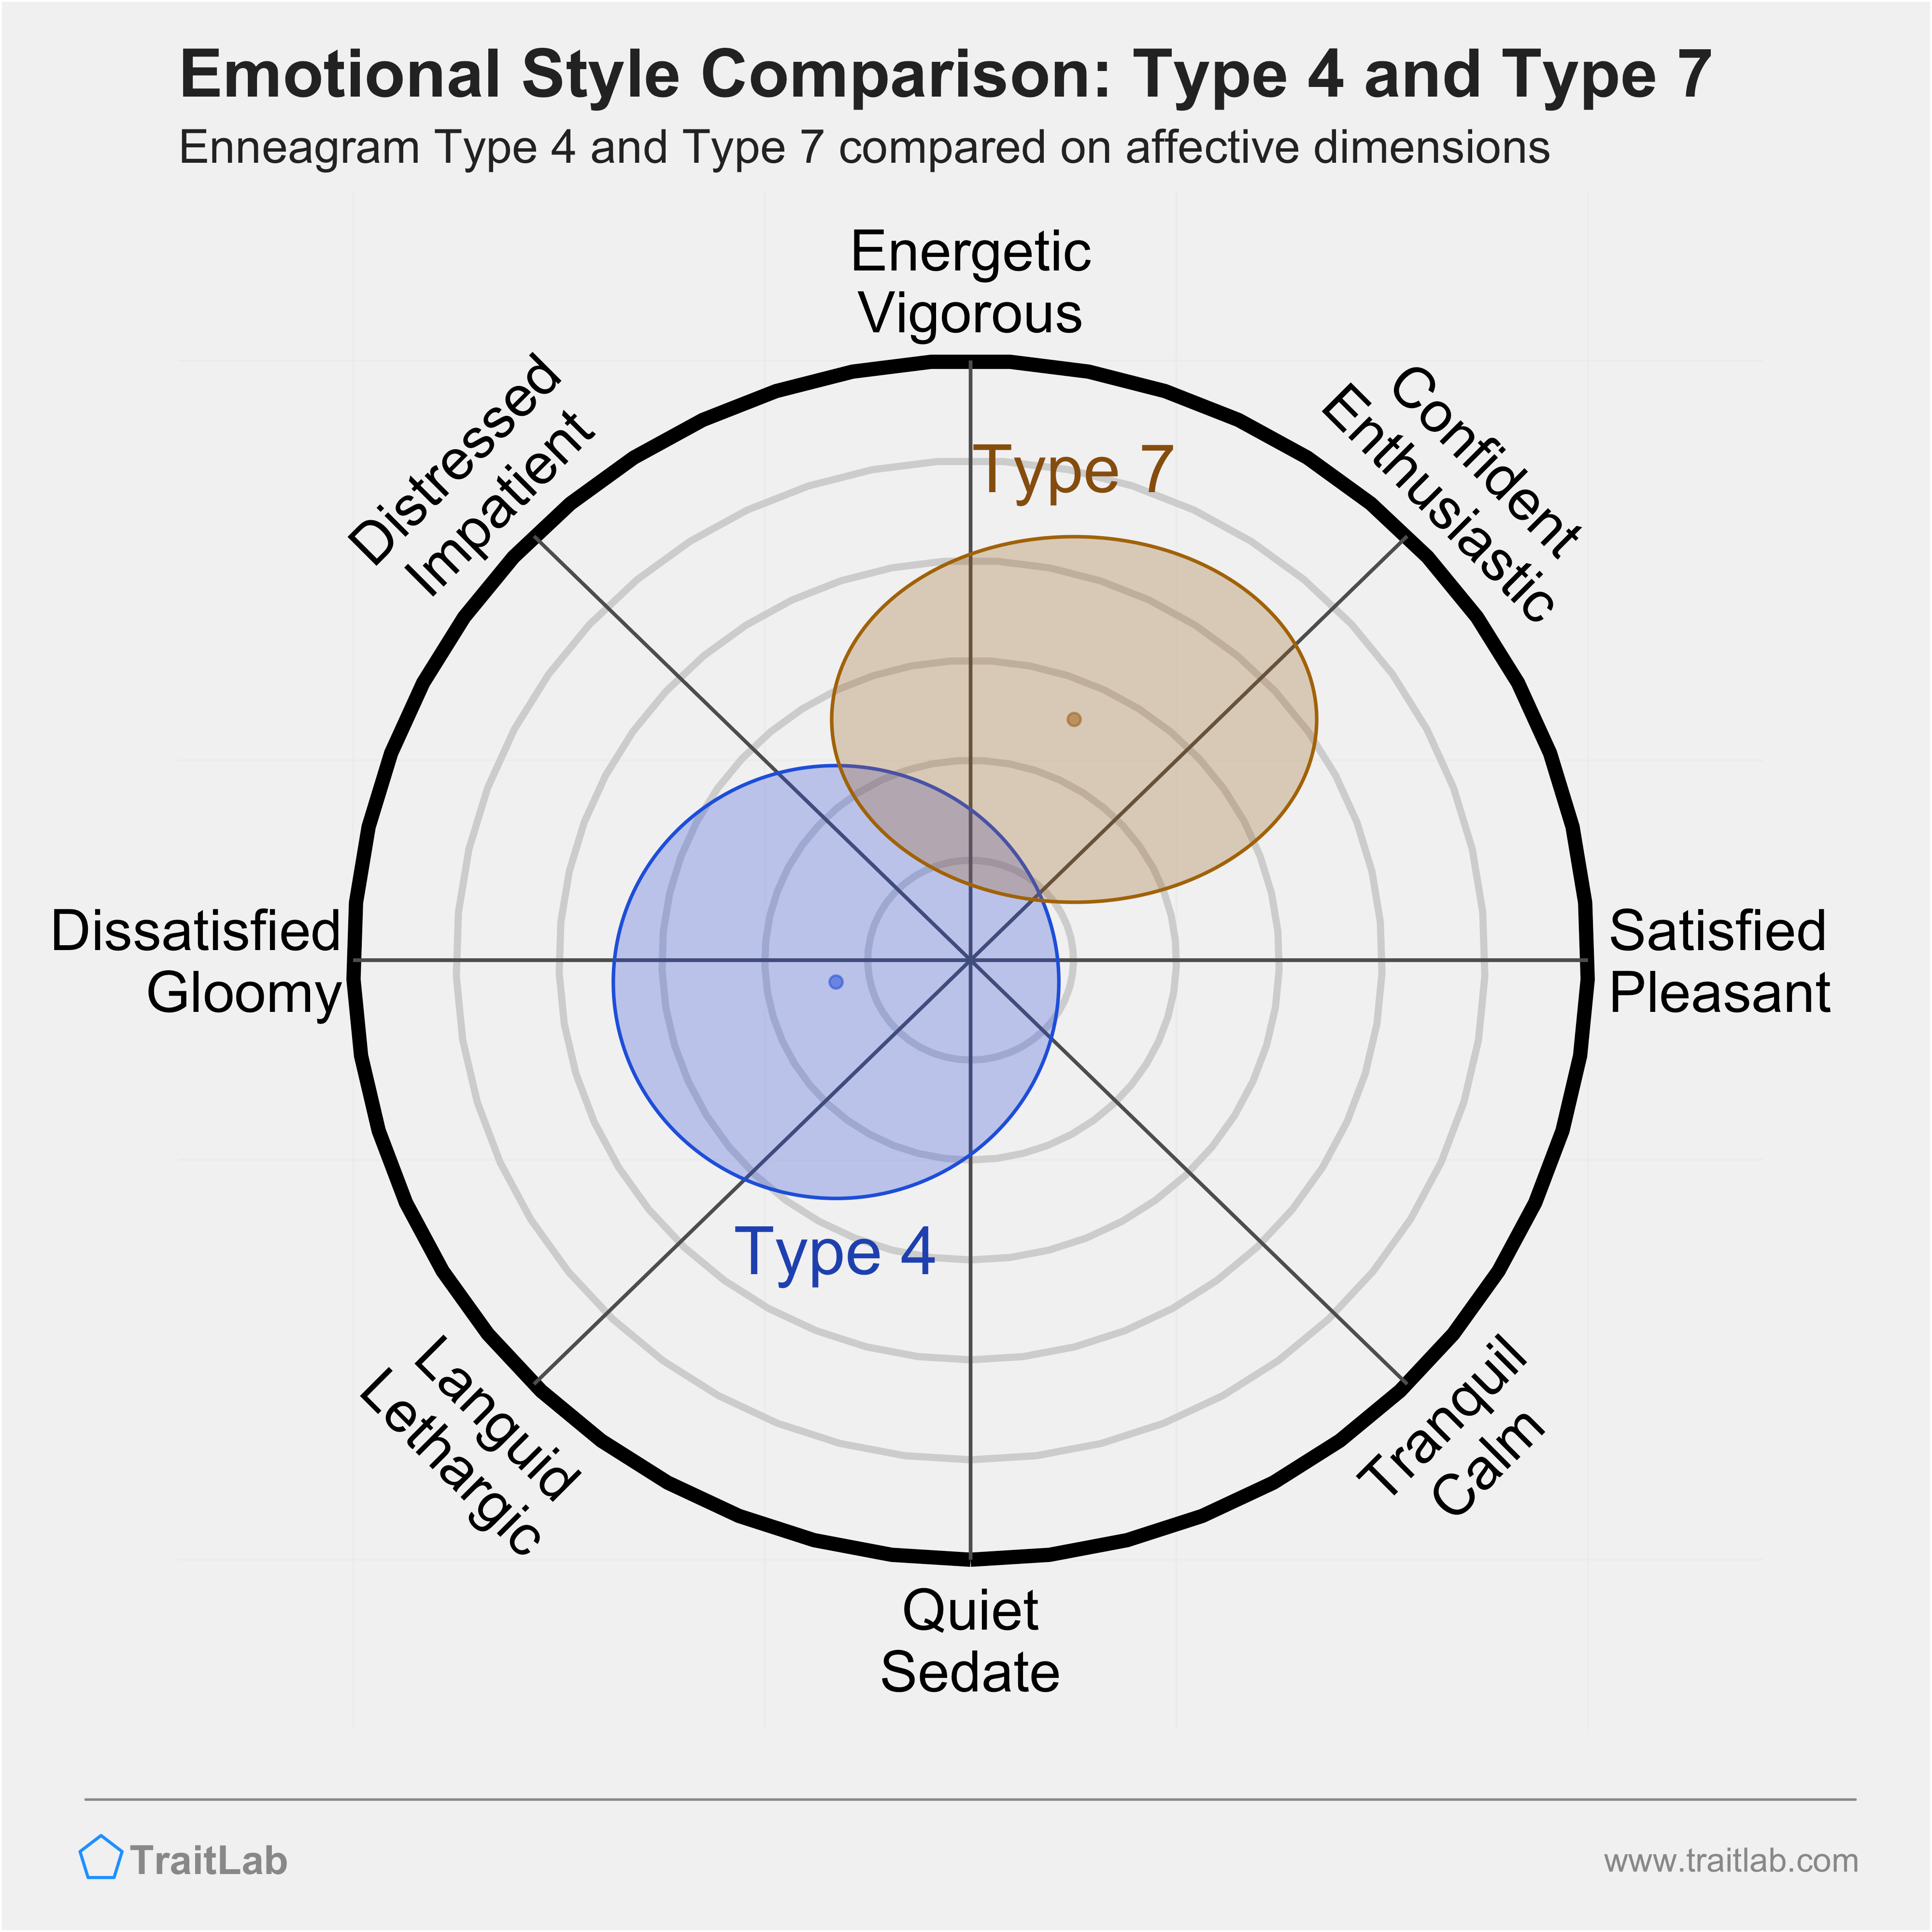 Type 4 and Type 7 comparison across emotional (affective) dimensions